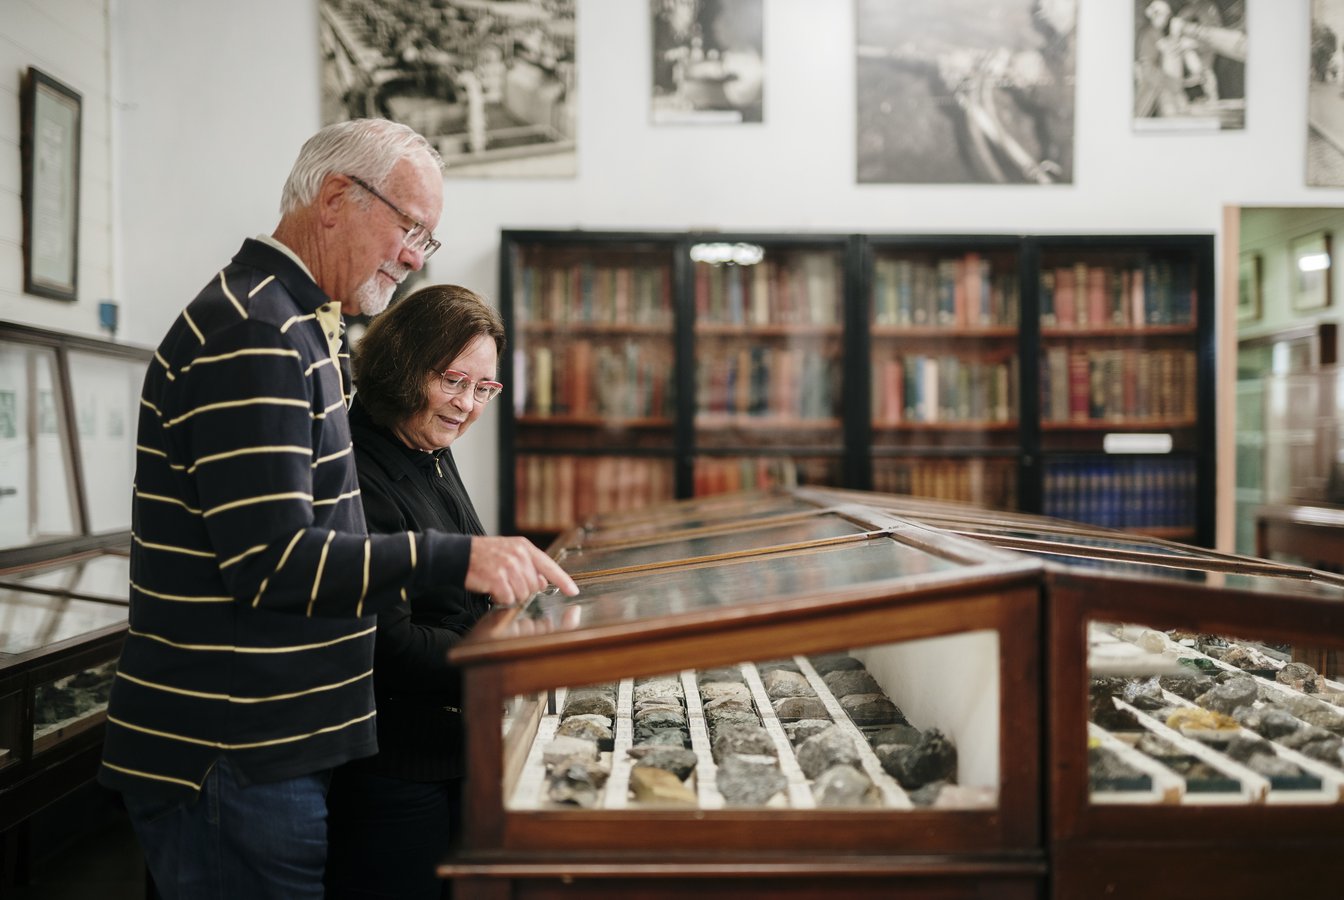 A photo of two people at the West Coast Heritage Centre, looking at a display of minerals, credit Tourism Australia.